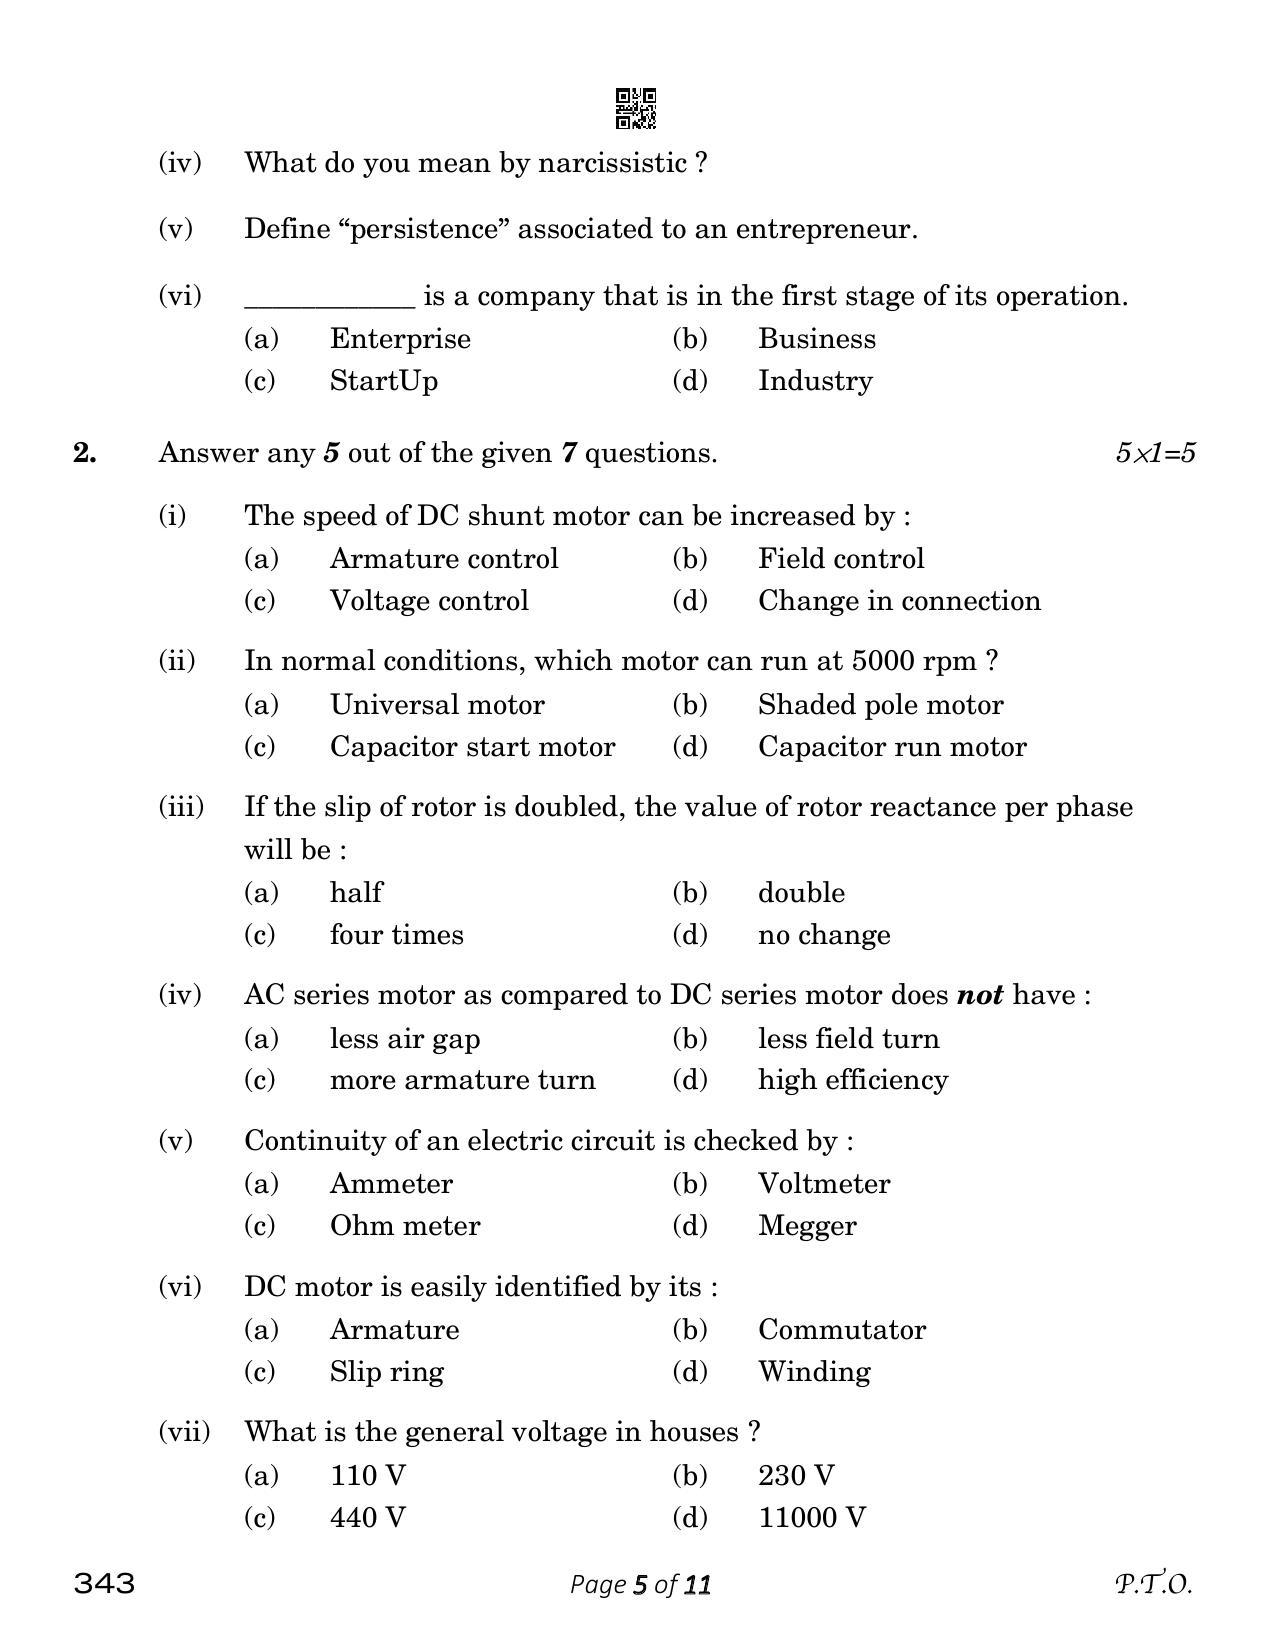 CBSE Class 12 Electrical Technology (Compartment) 2023 Question Paper - Page 5